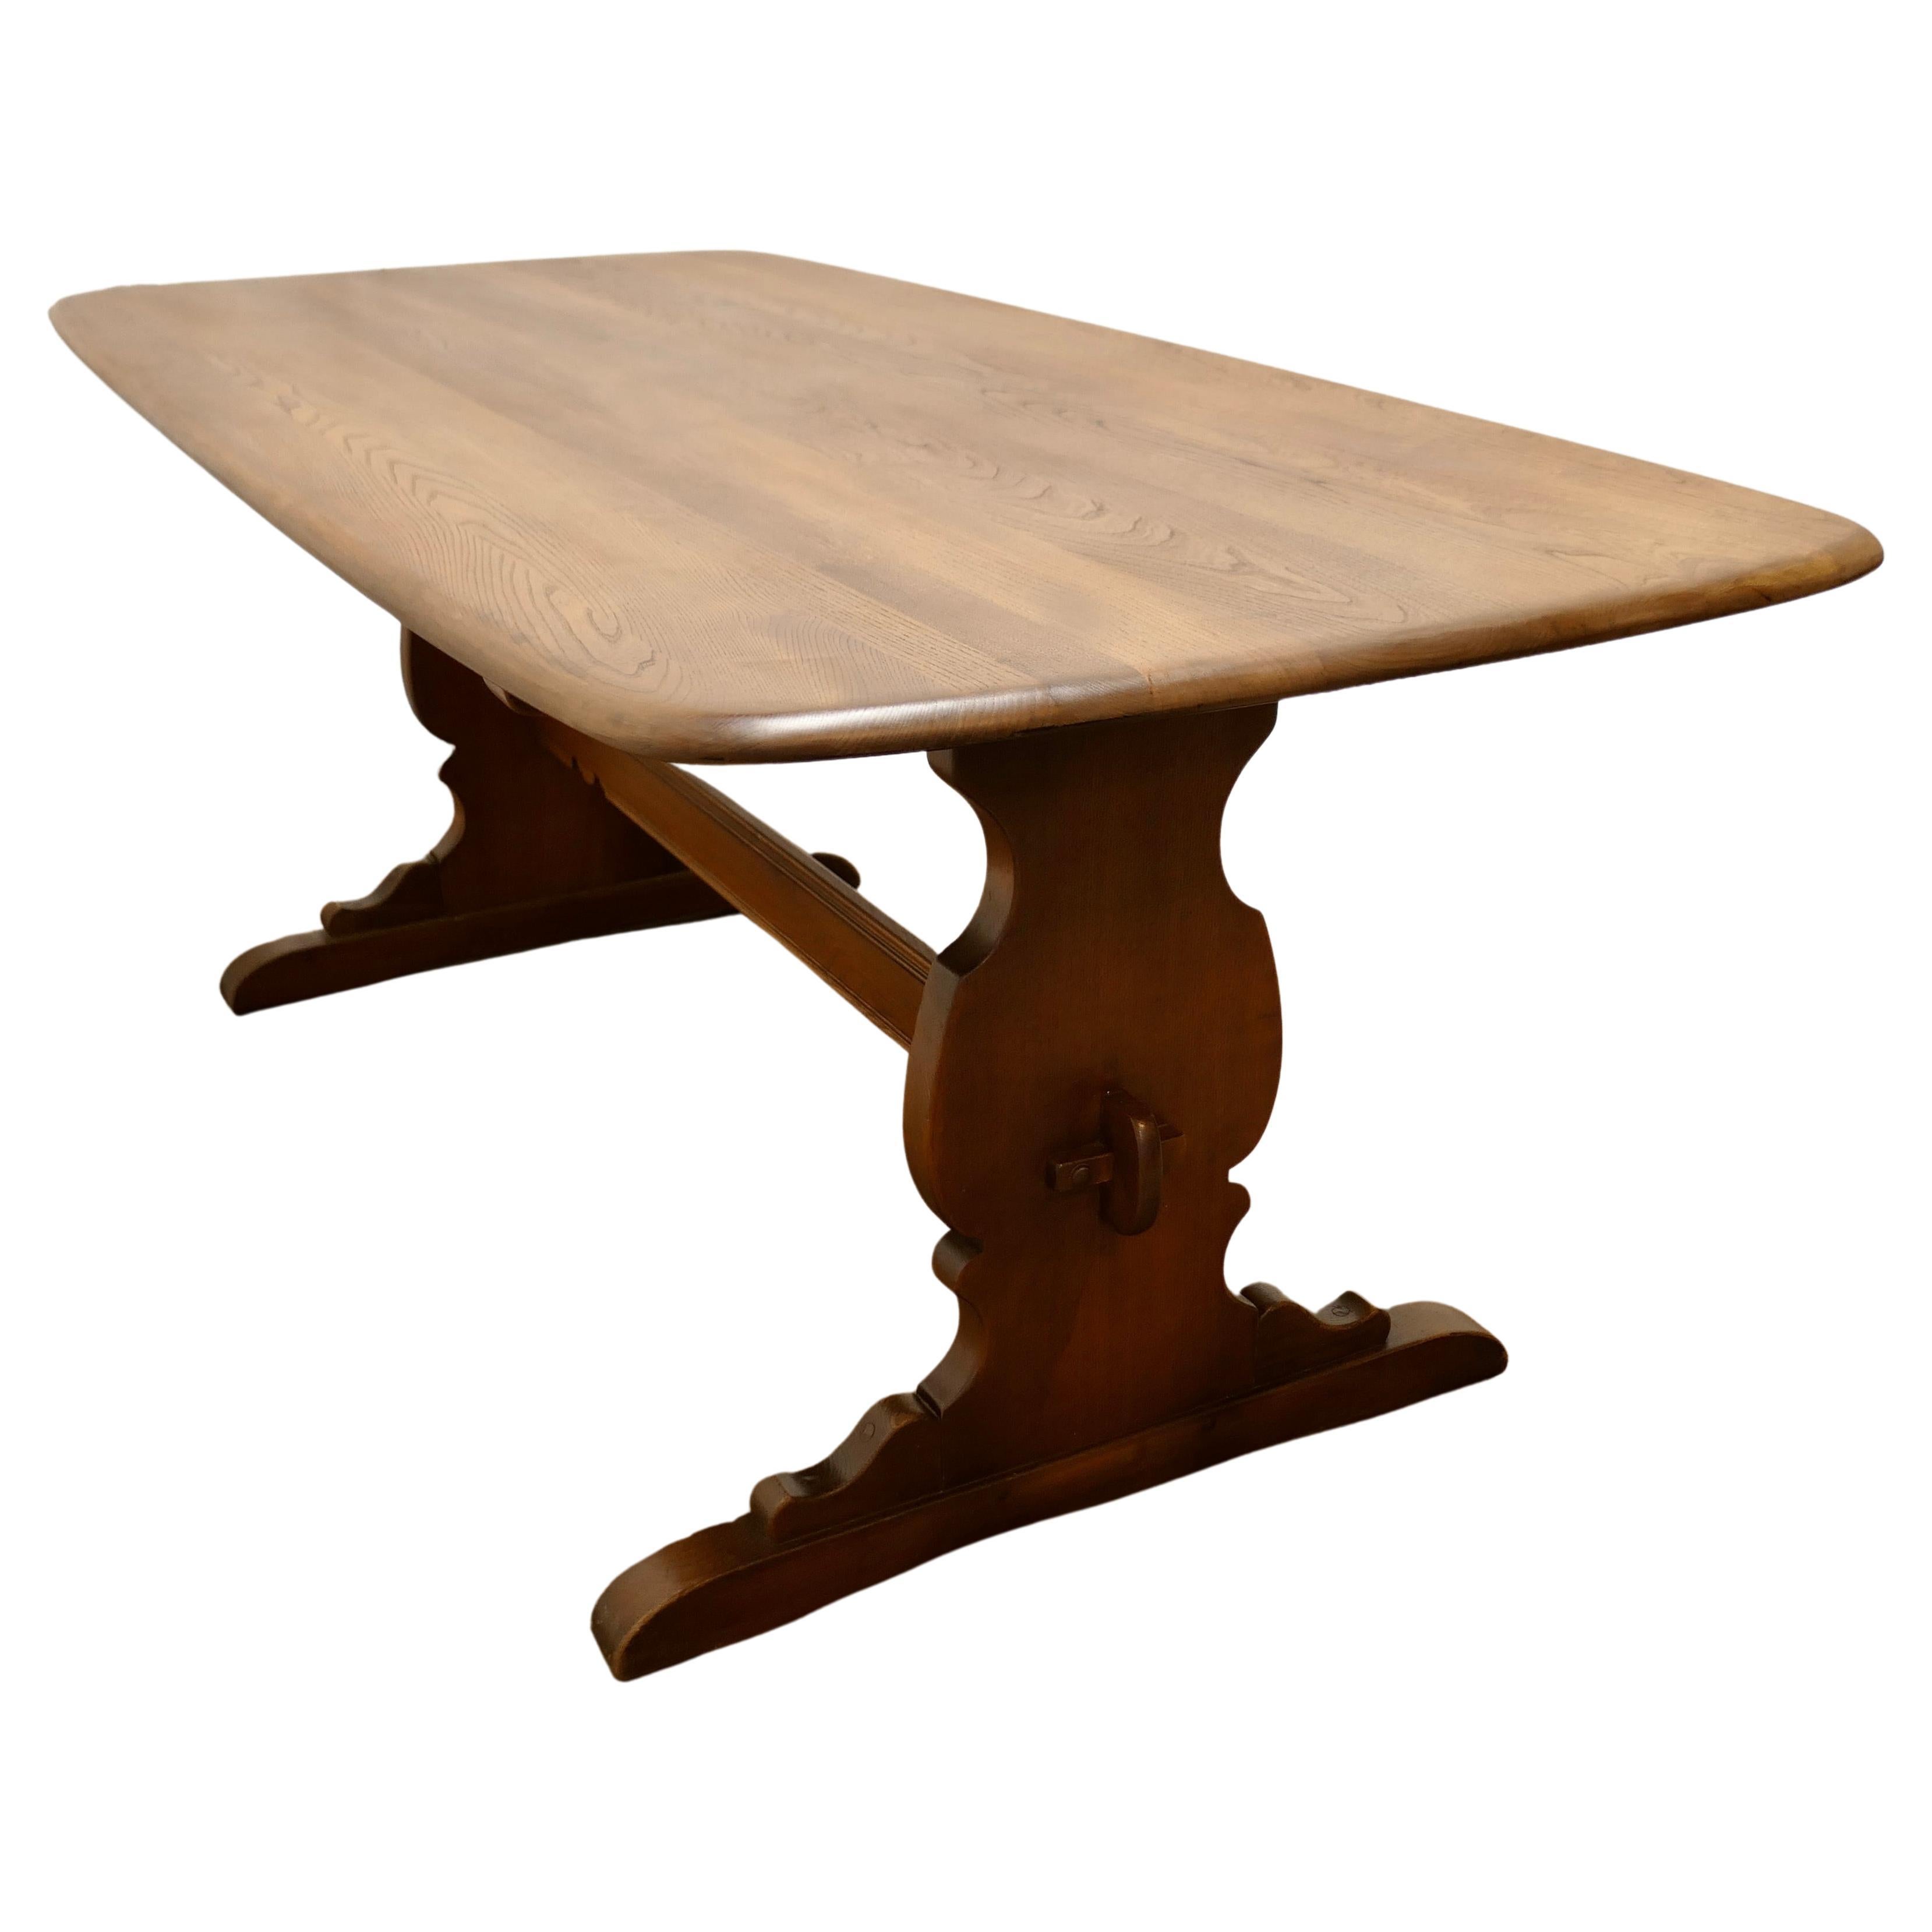 Good Quality Elm Refectory Dining Table This is a Superb Piece